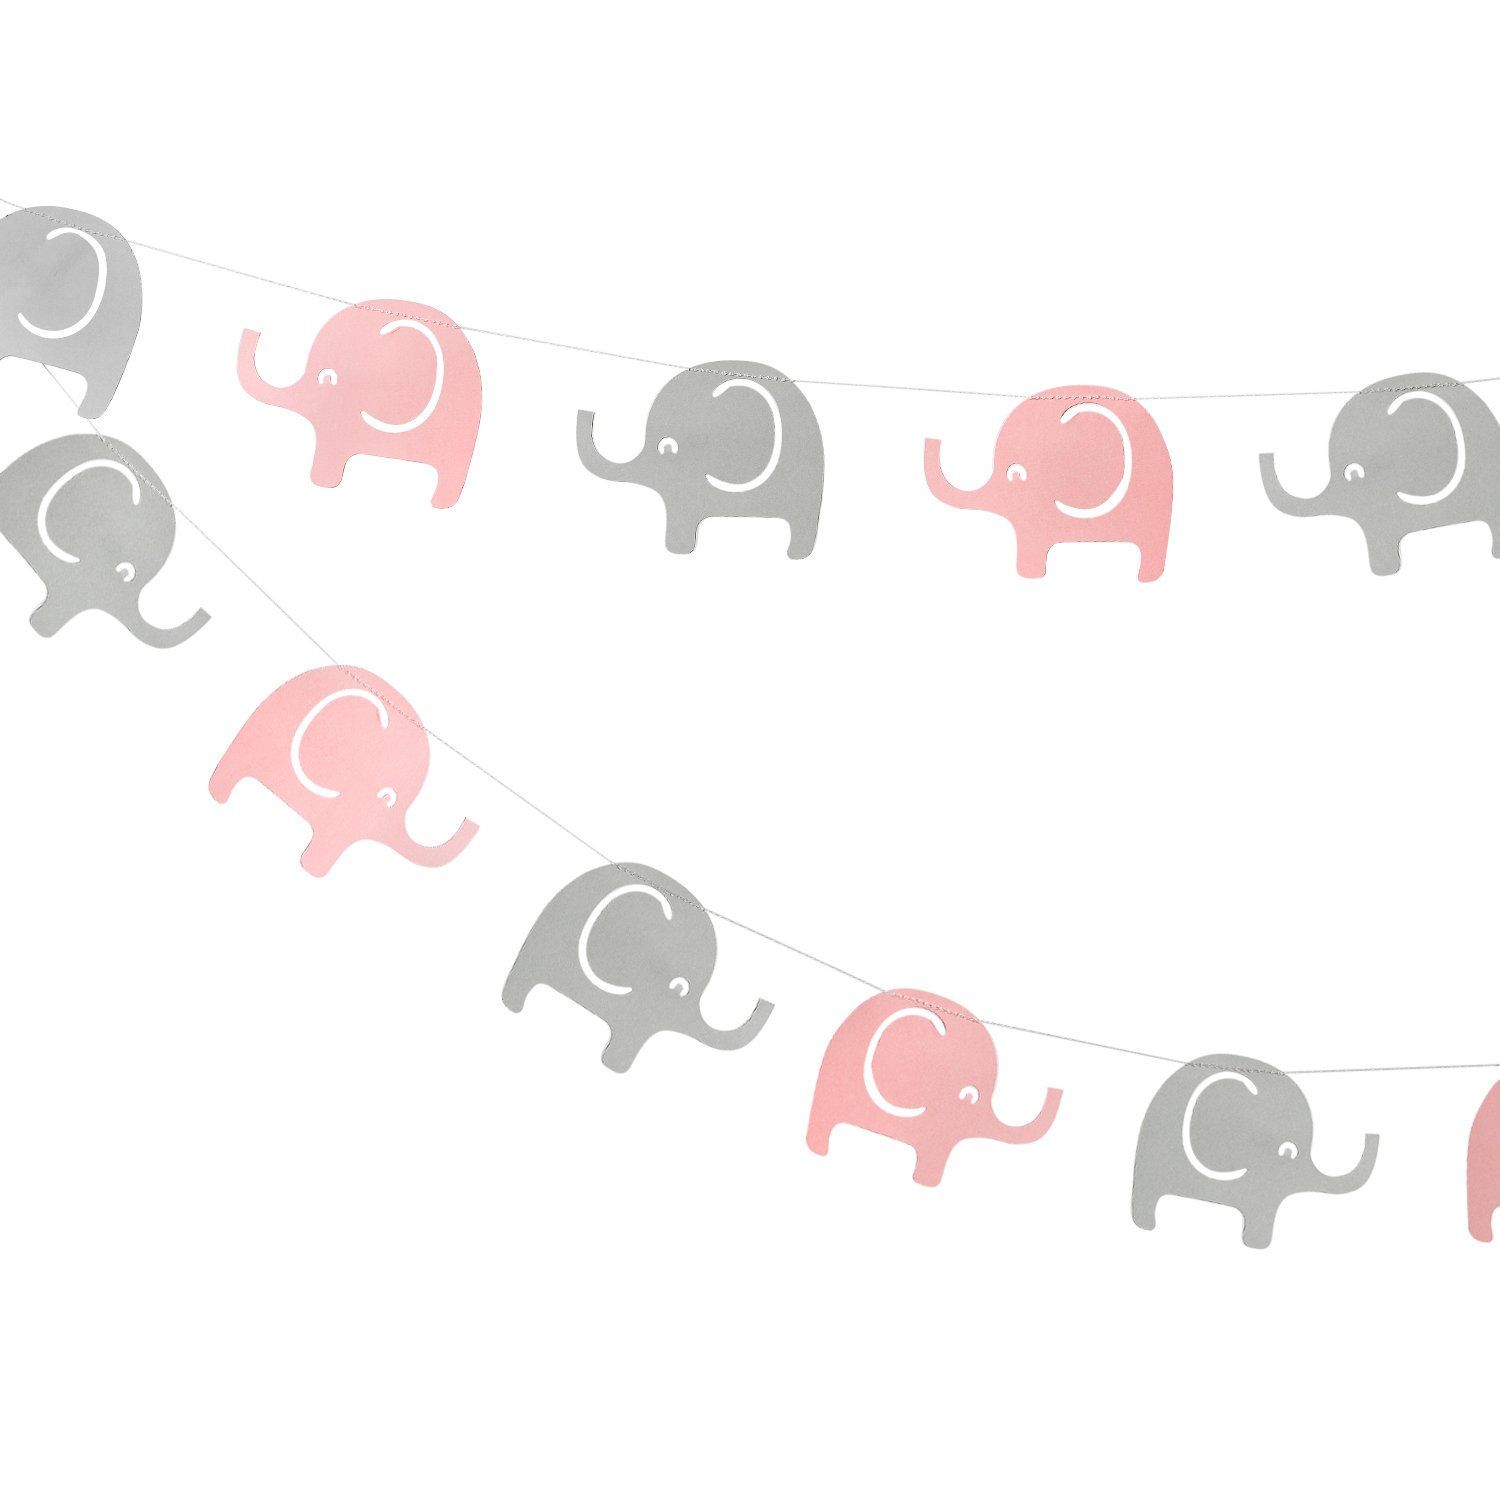 Full Size of Baby Shower:89+ Indulging Baby Shower Banner Picture Inspirations Amazoncom Pink Elephant Baby Shower Party Package Serves 16 Elephant Garland Decorations Elephant Baby Shower Banner Elephant Banner Pink Gray